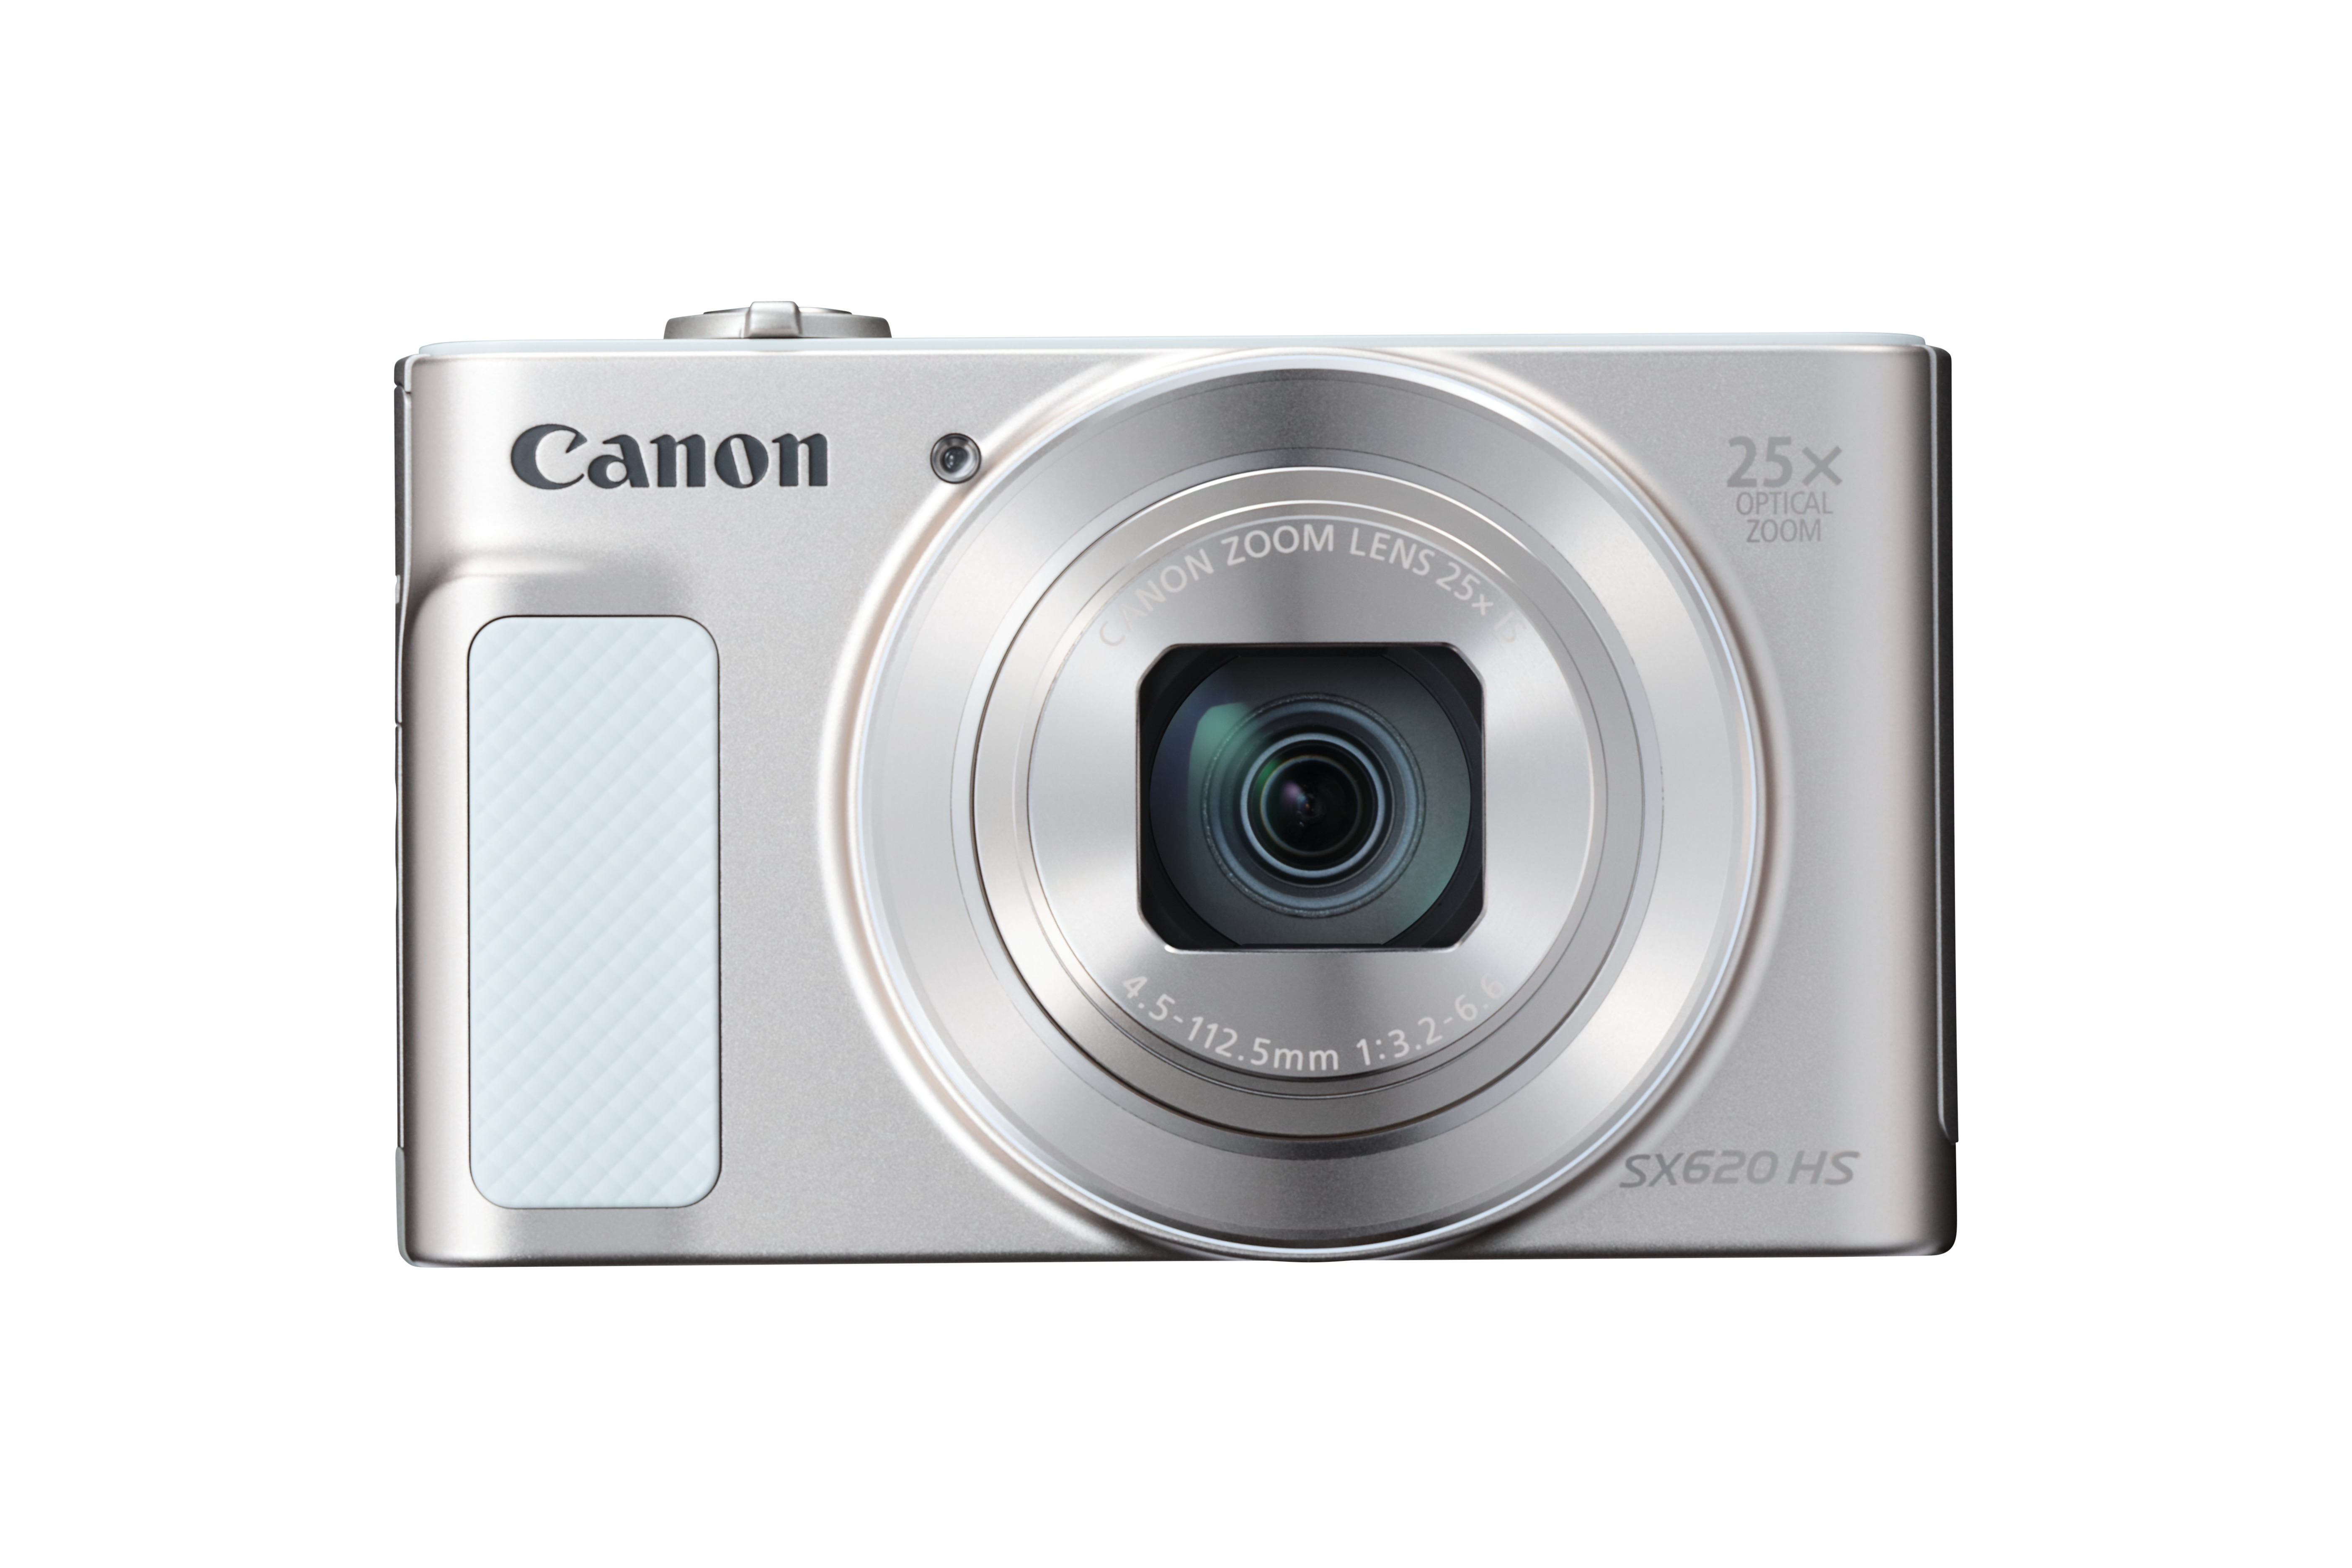 Canon PowerShot SX620 HS - Digital camera - compact - 20.2 MP - 1080p / 30 fps - 25x optical zoom - Wi-Fi, NFC - silver